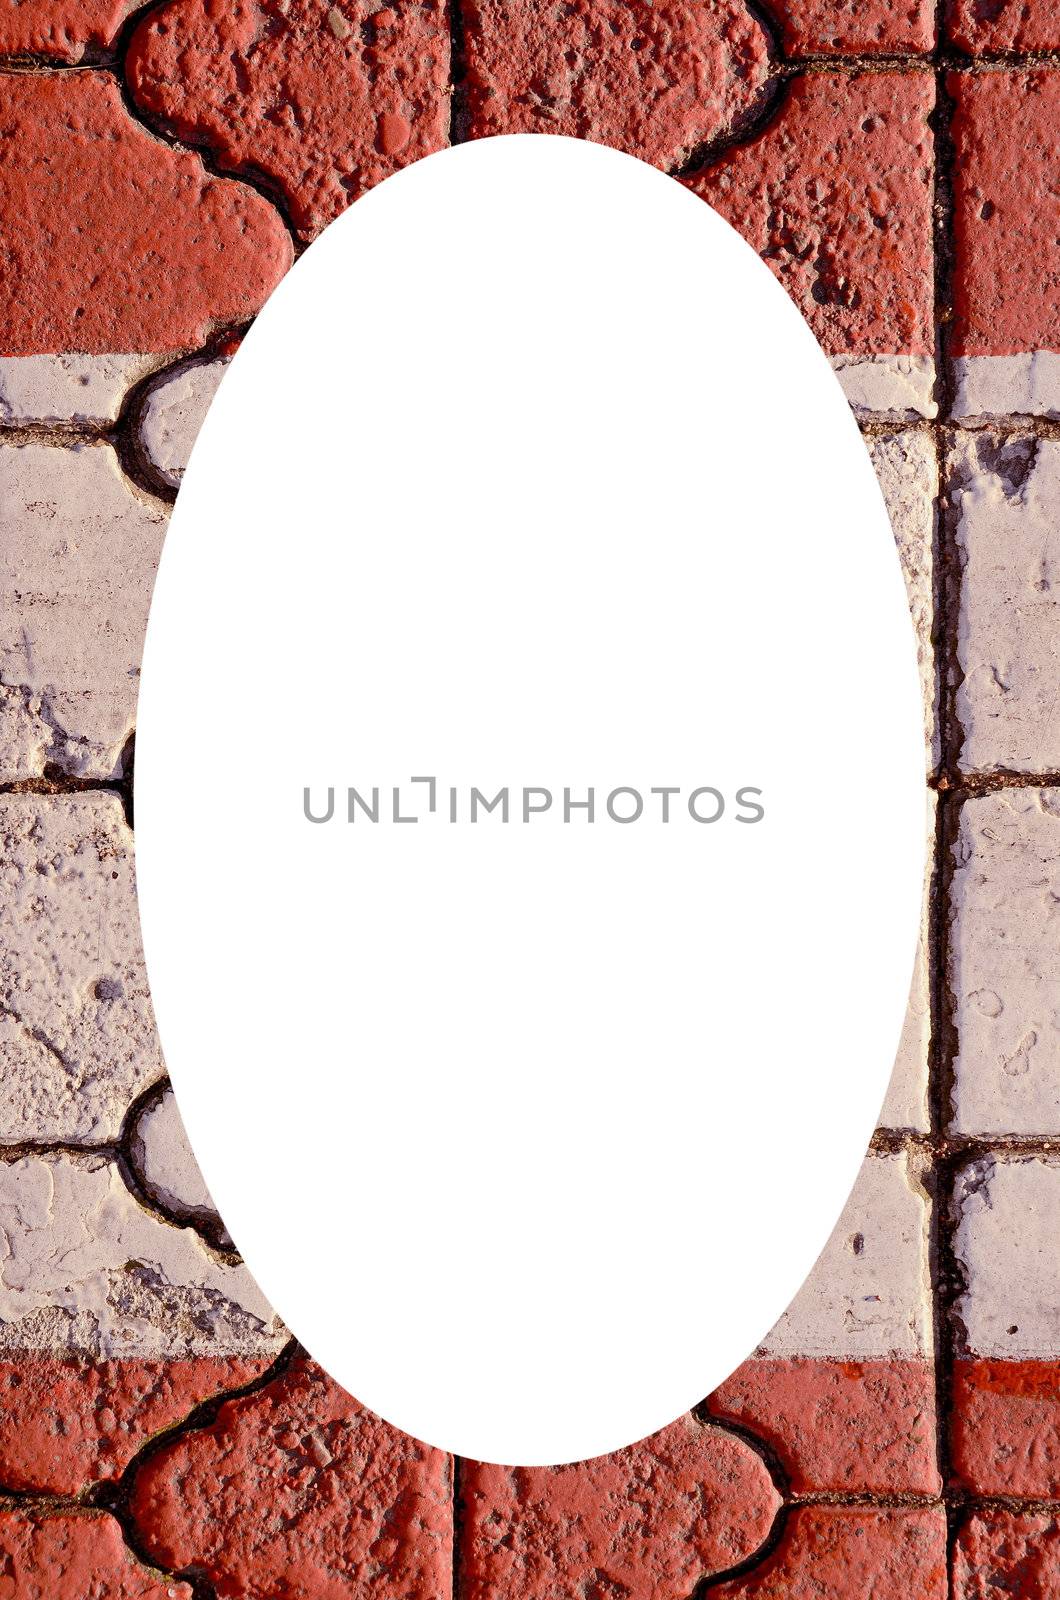 Wall fragment background and white oval in center by sauletas